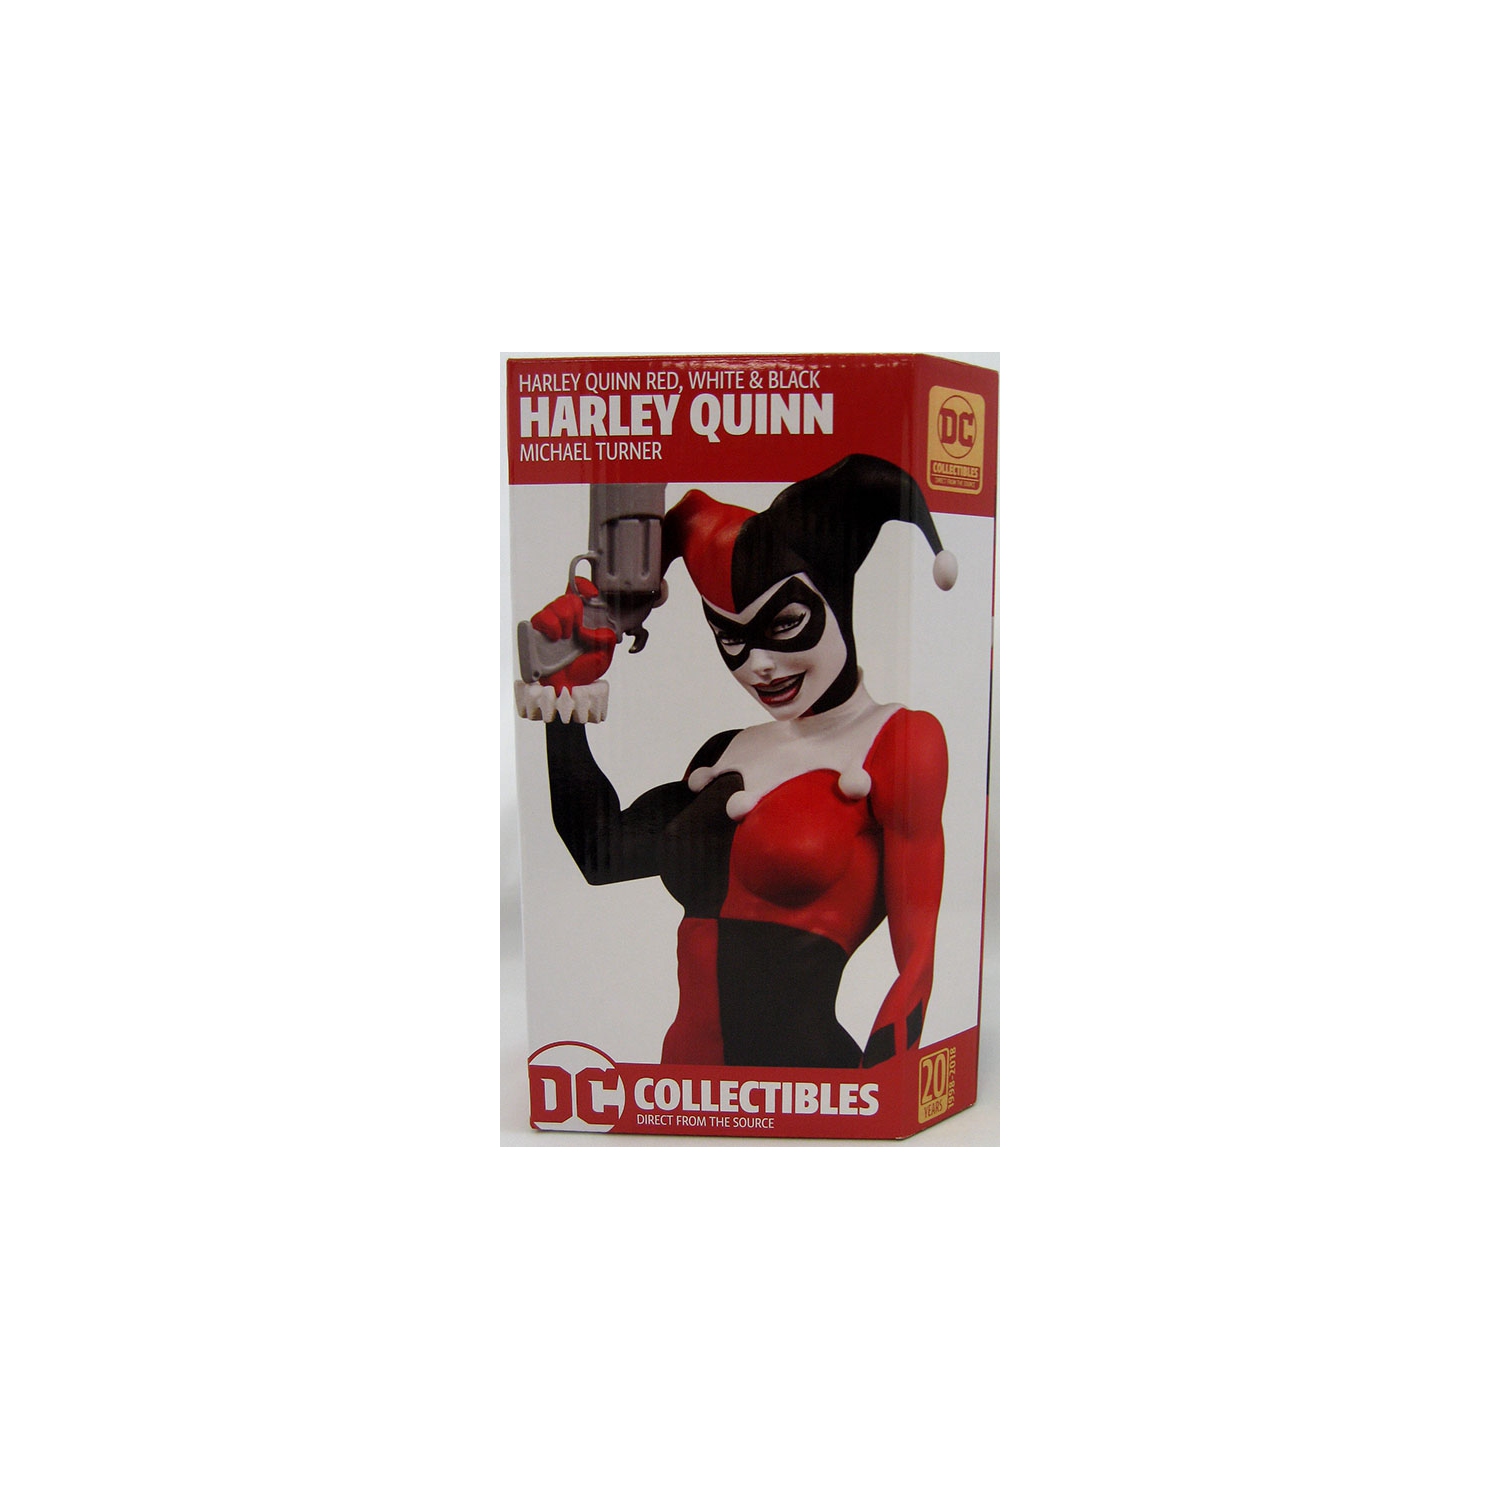 Harley Quinn Red & White 7 Inch Statue Figure - Harley Quinn by Michael Turner